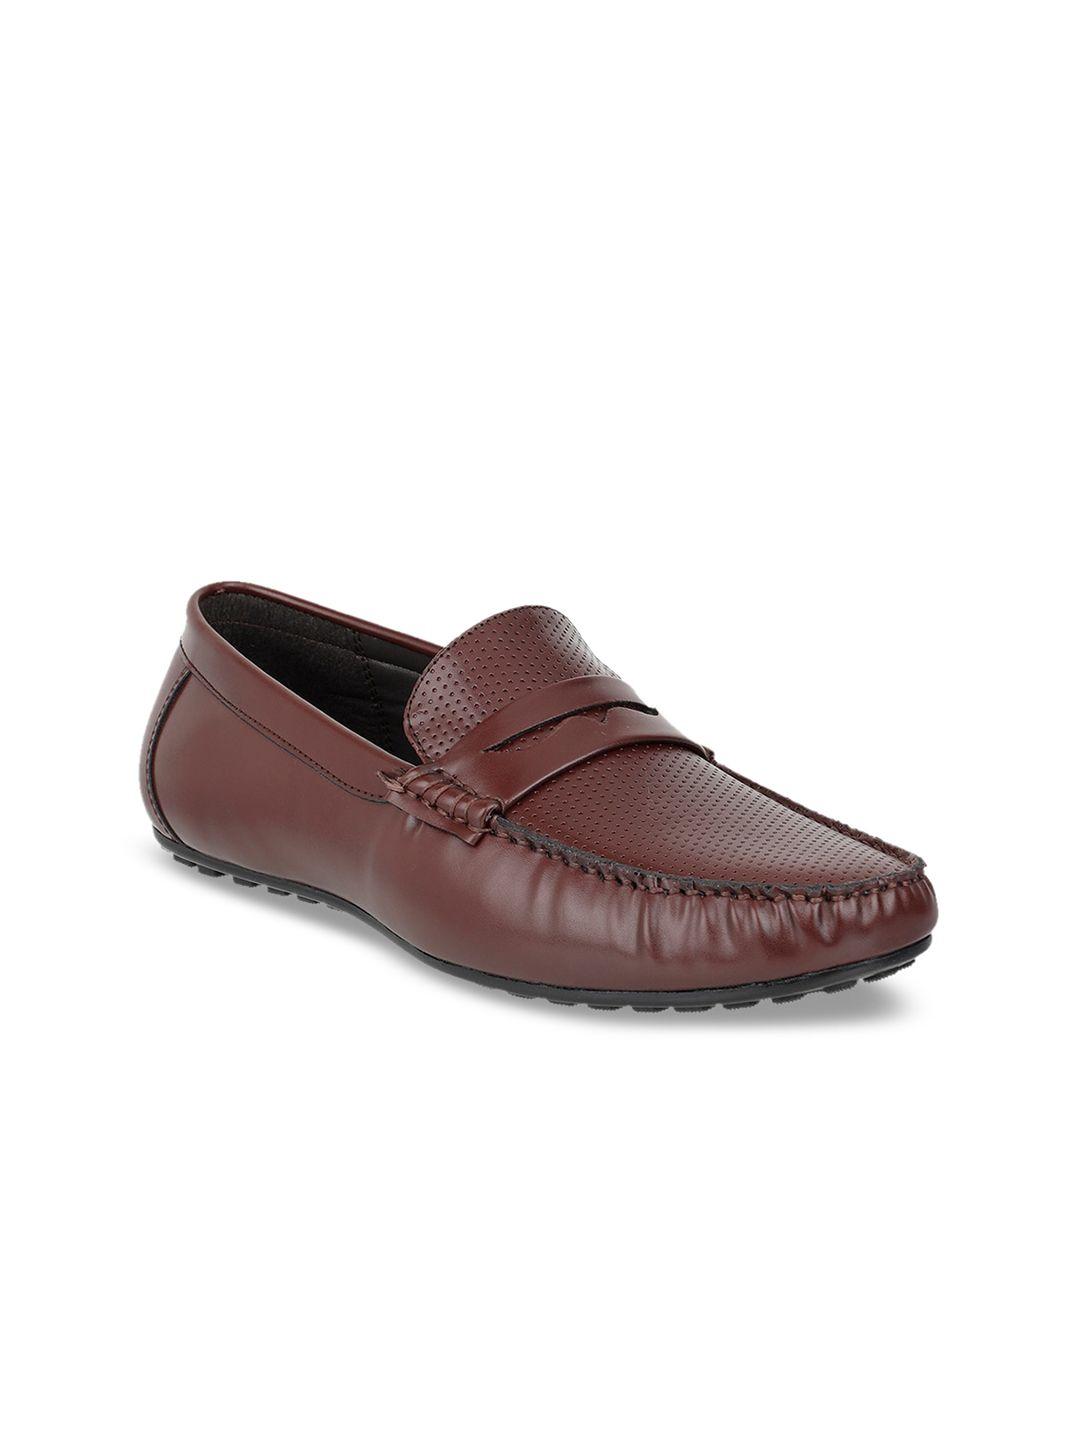 carlton london men brown solid loafers